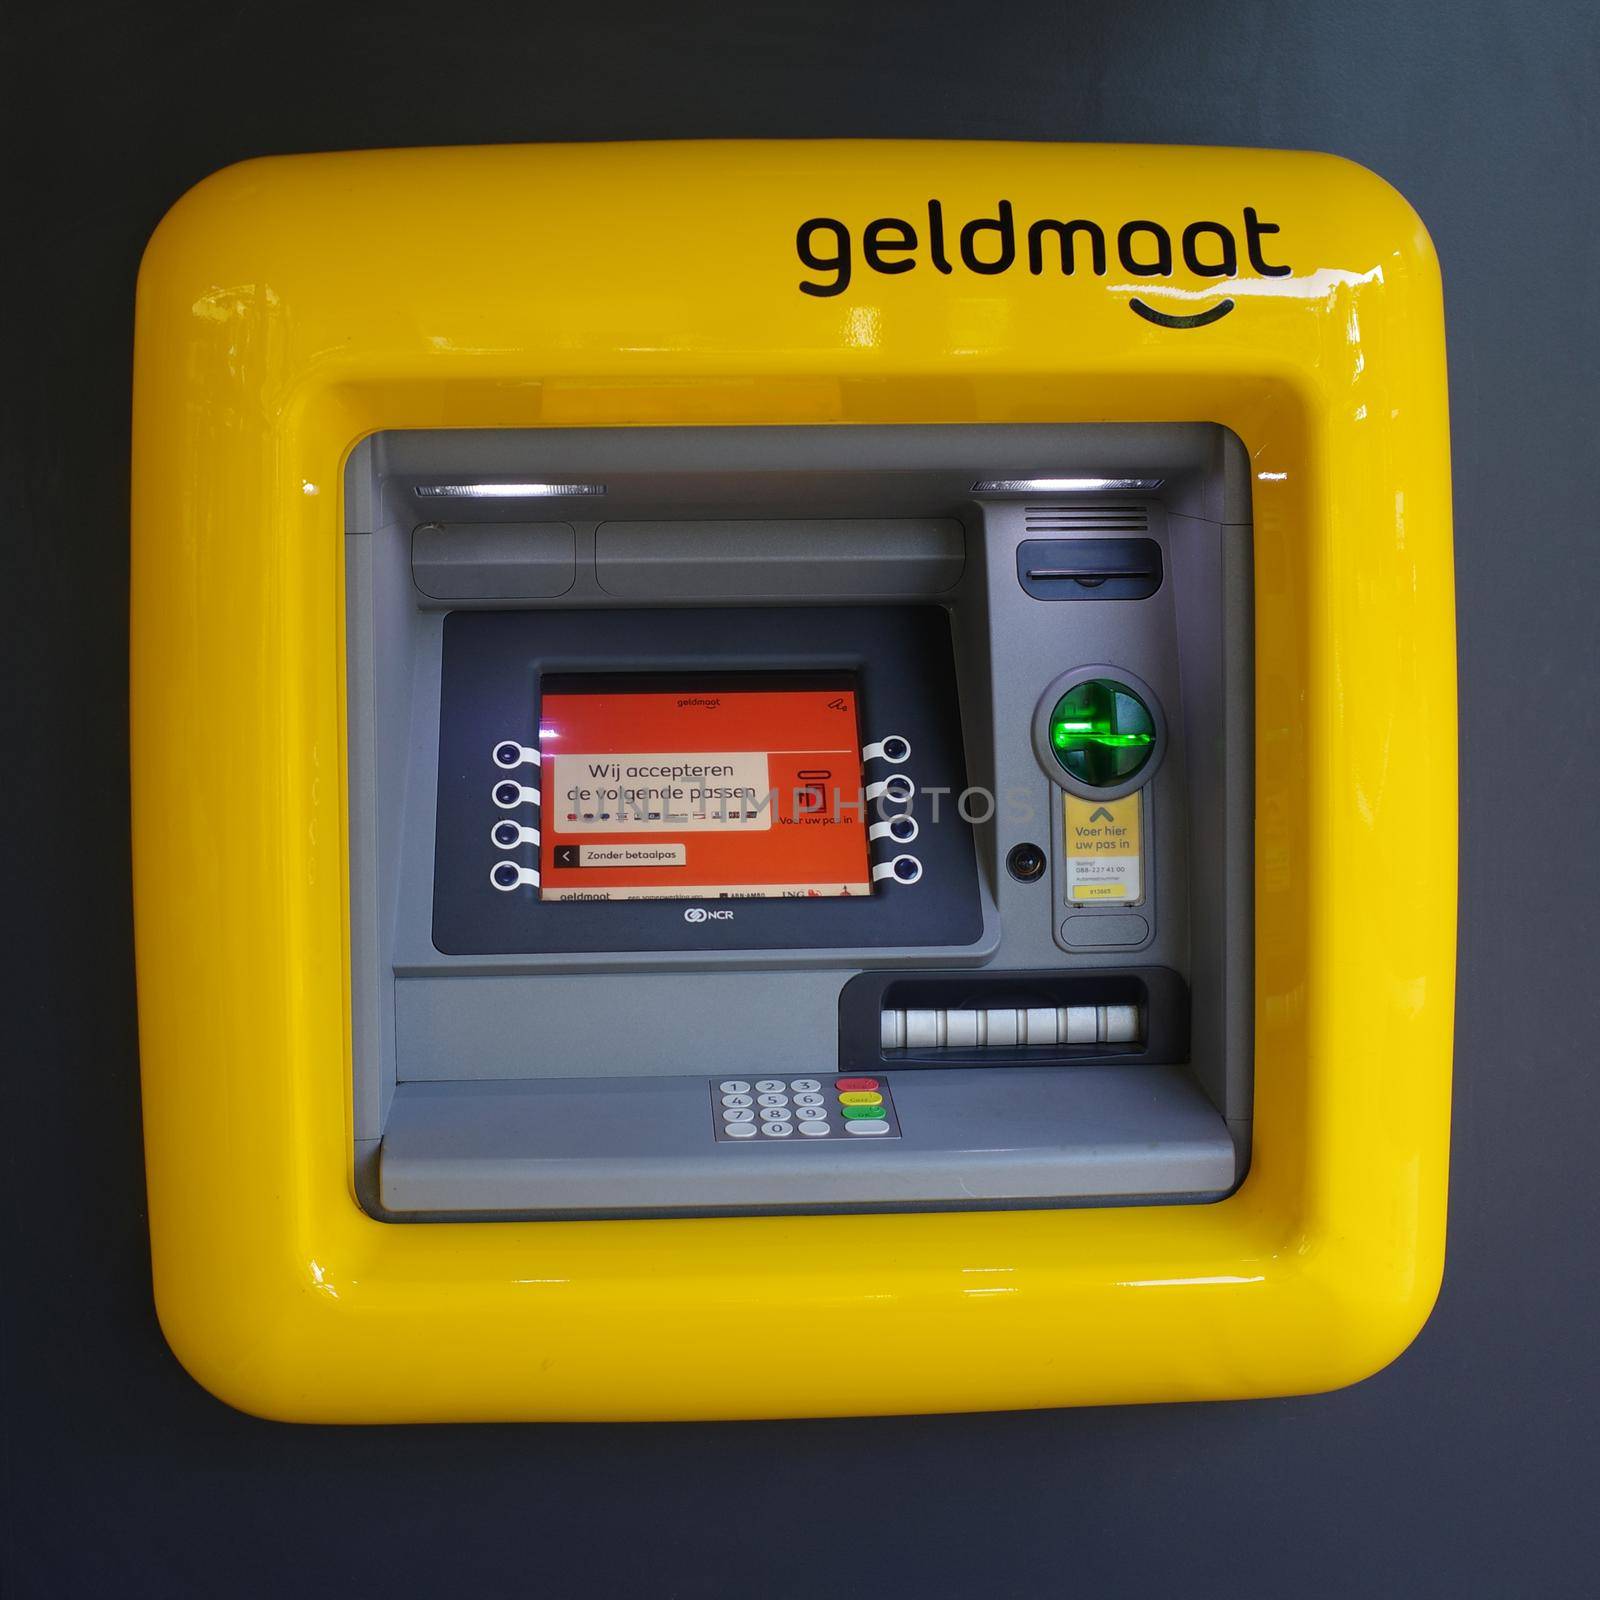 Bright yellow ATM machine from the Netherlands by WielandTeixeira